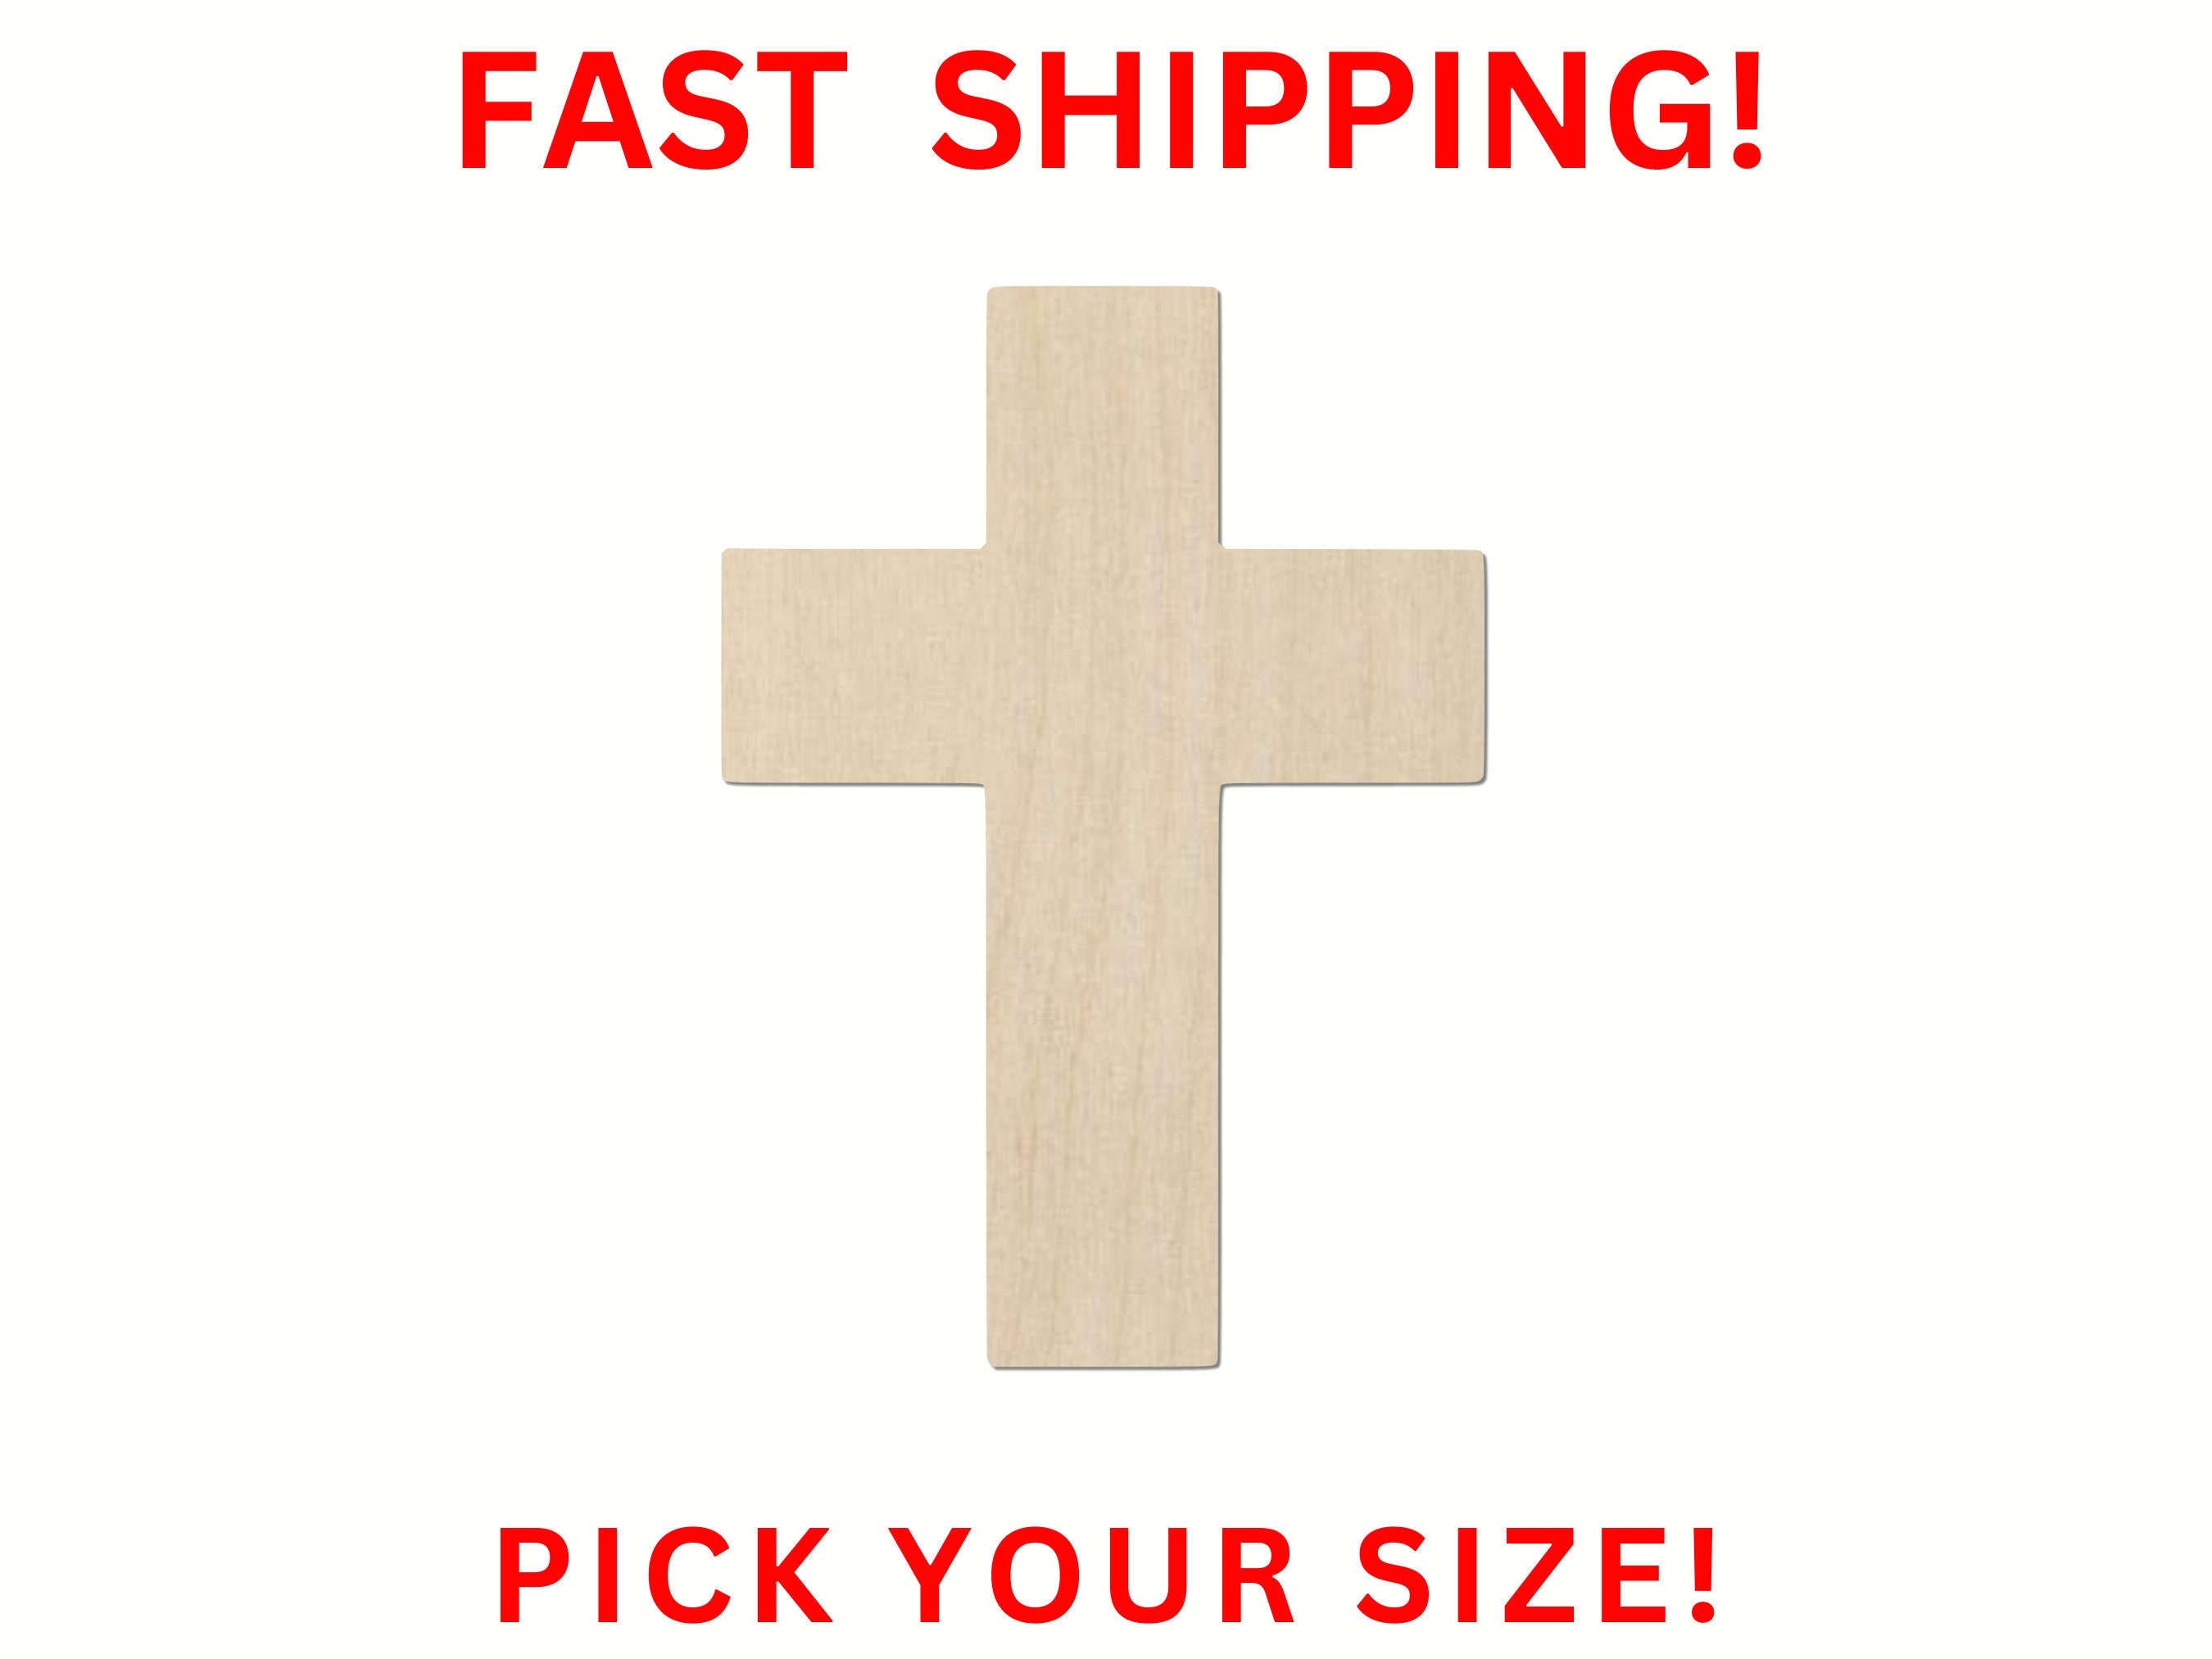 6-Pack Unfinished Wood Cutout Cross Shaped for Craft DIY, Sunday